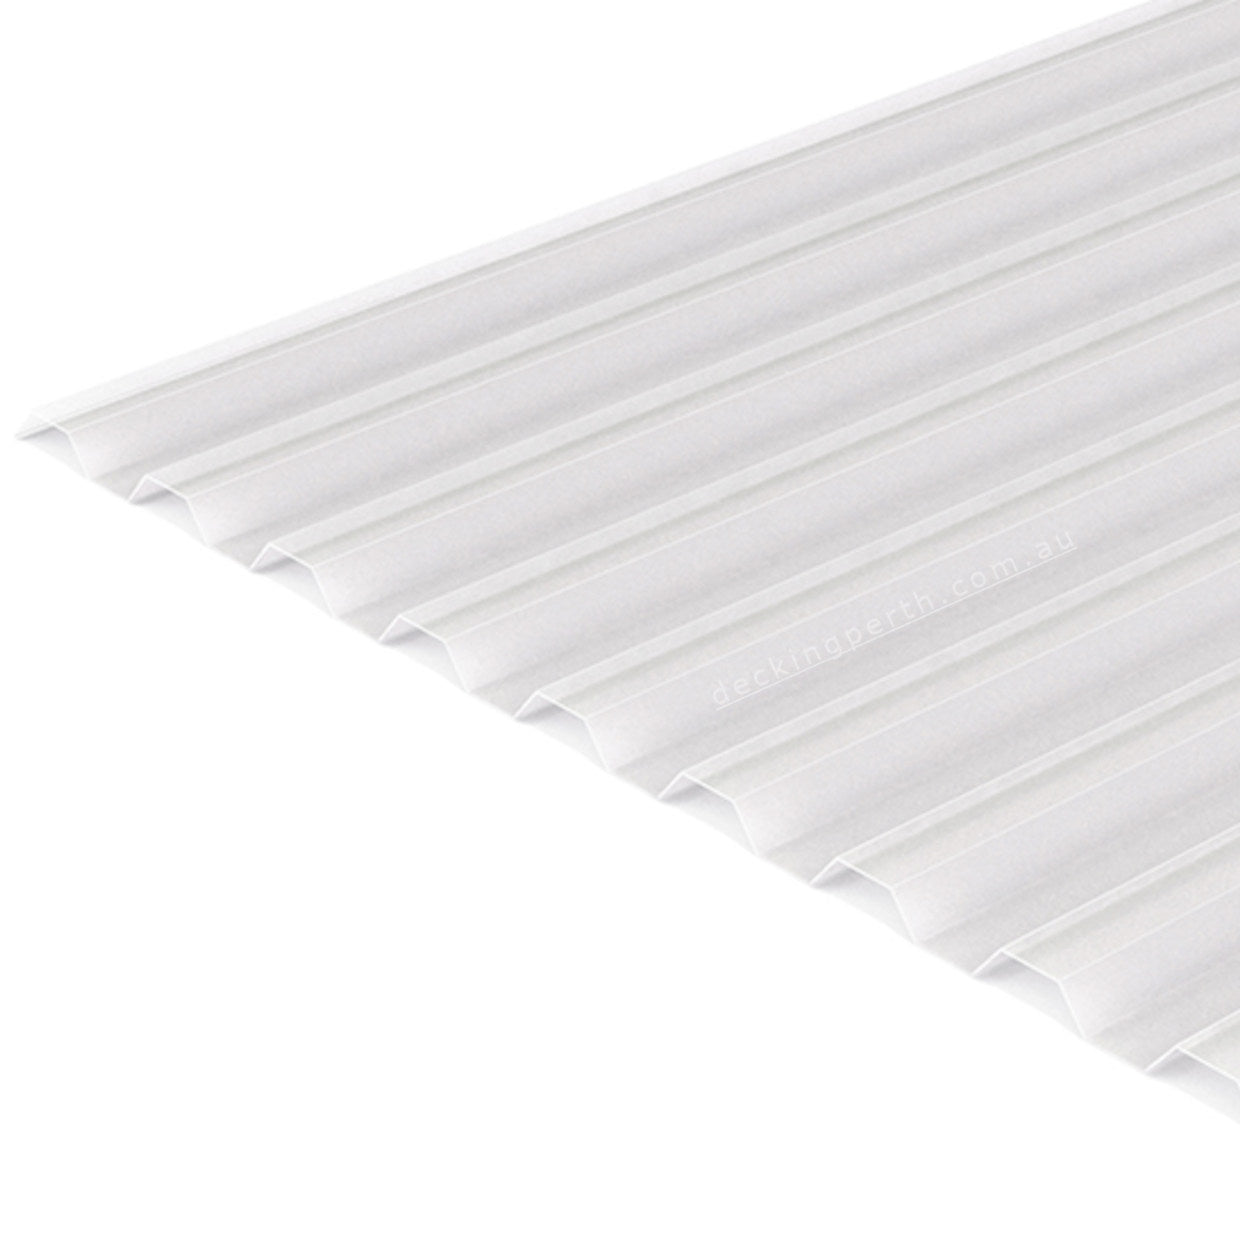 SUNSKY_3001_Greca_polycarbonate_sheeting_Diffused_Ice_Decking_Perth